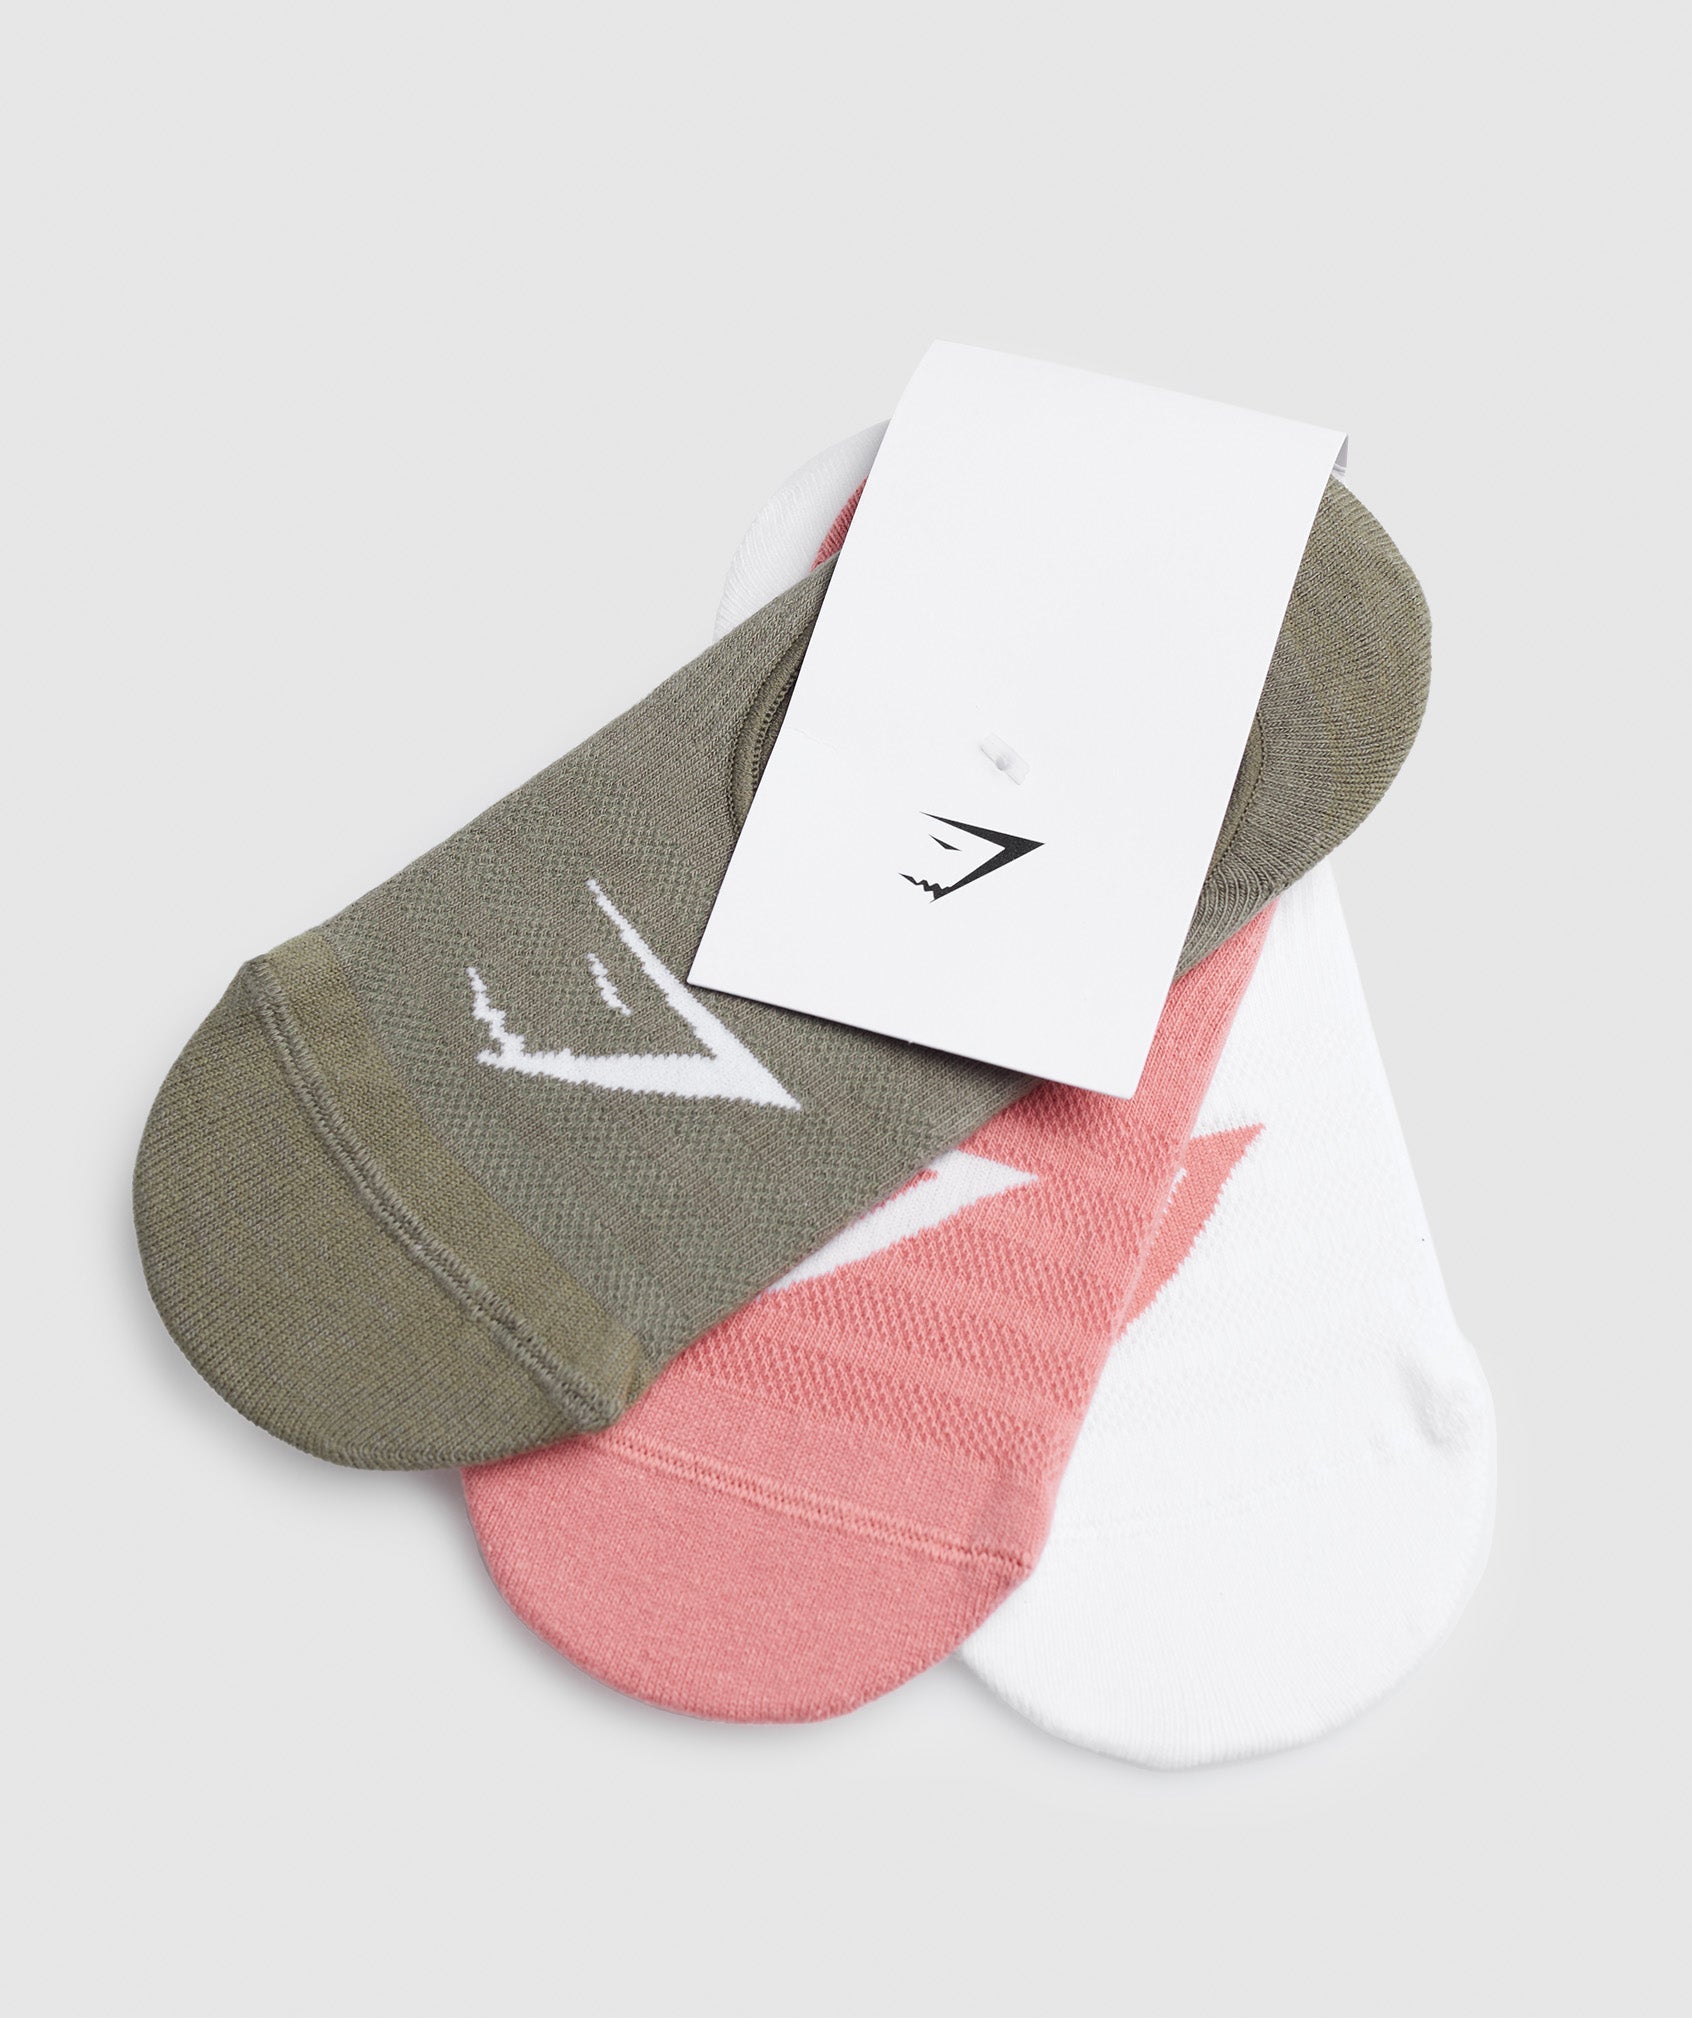 No Show Socks 3pk in Olive/Terracotta Pink/White - view 2